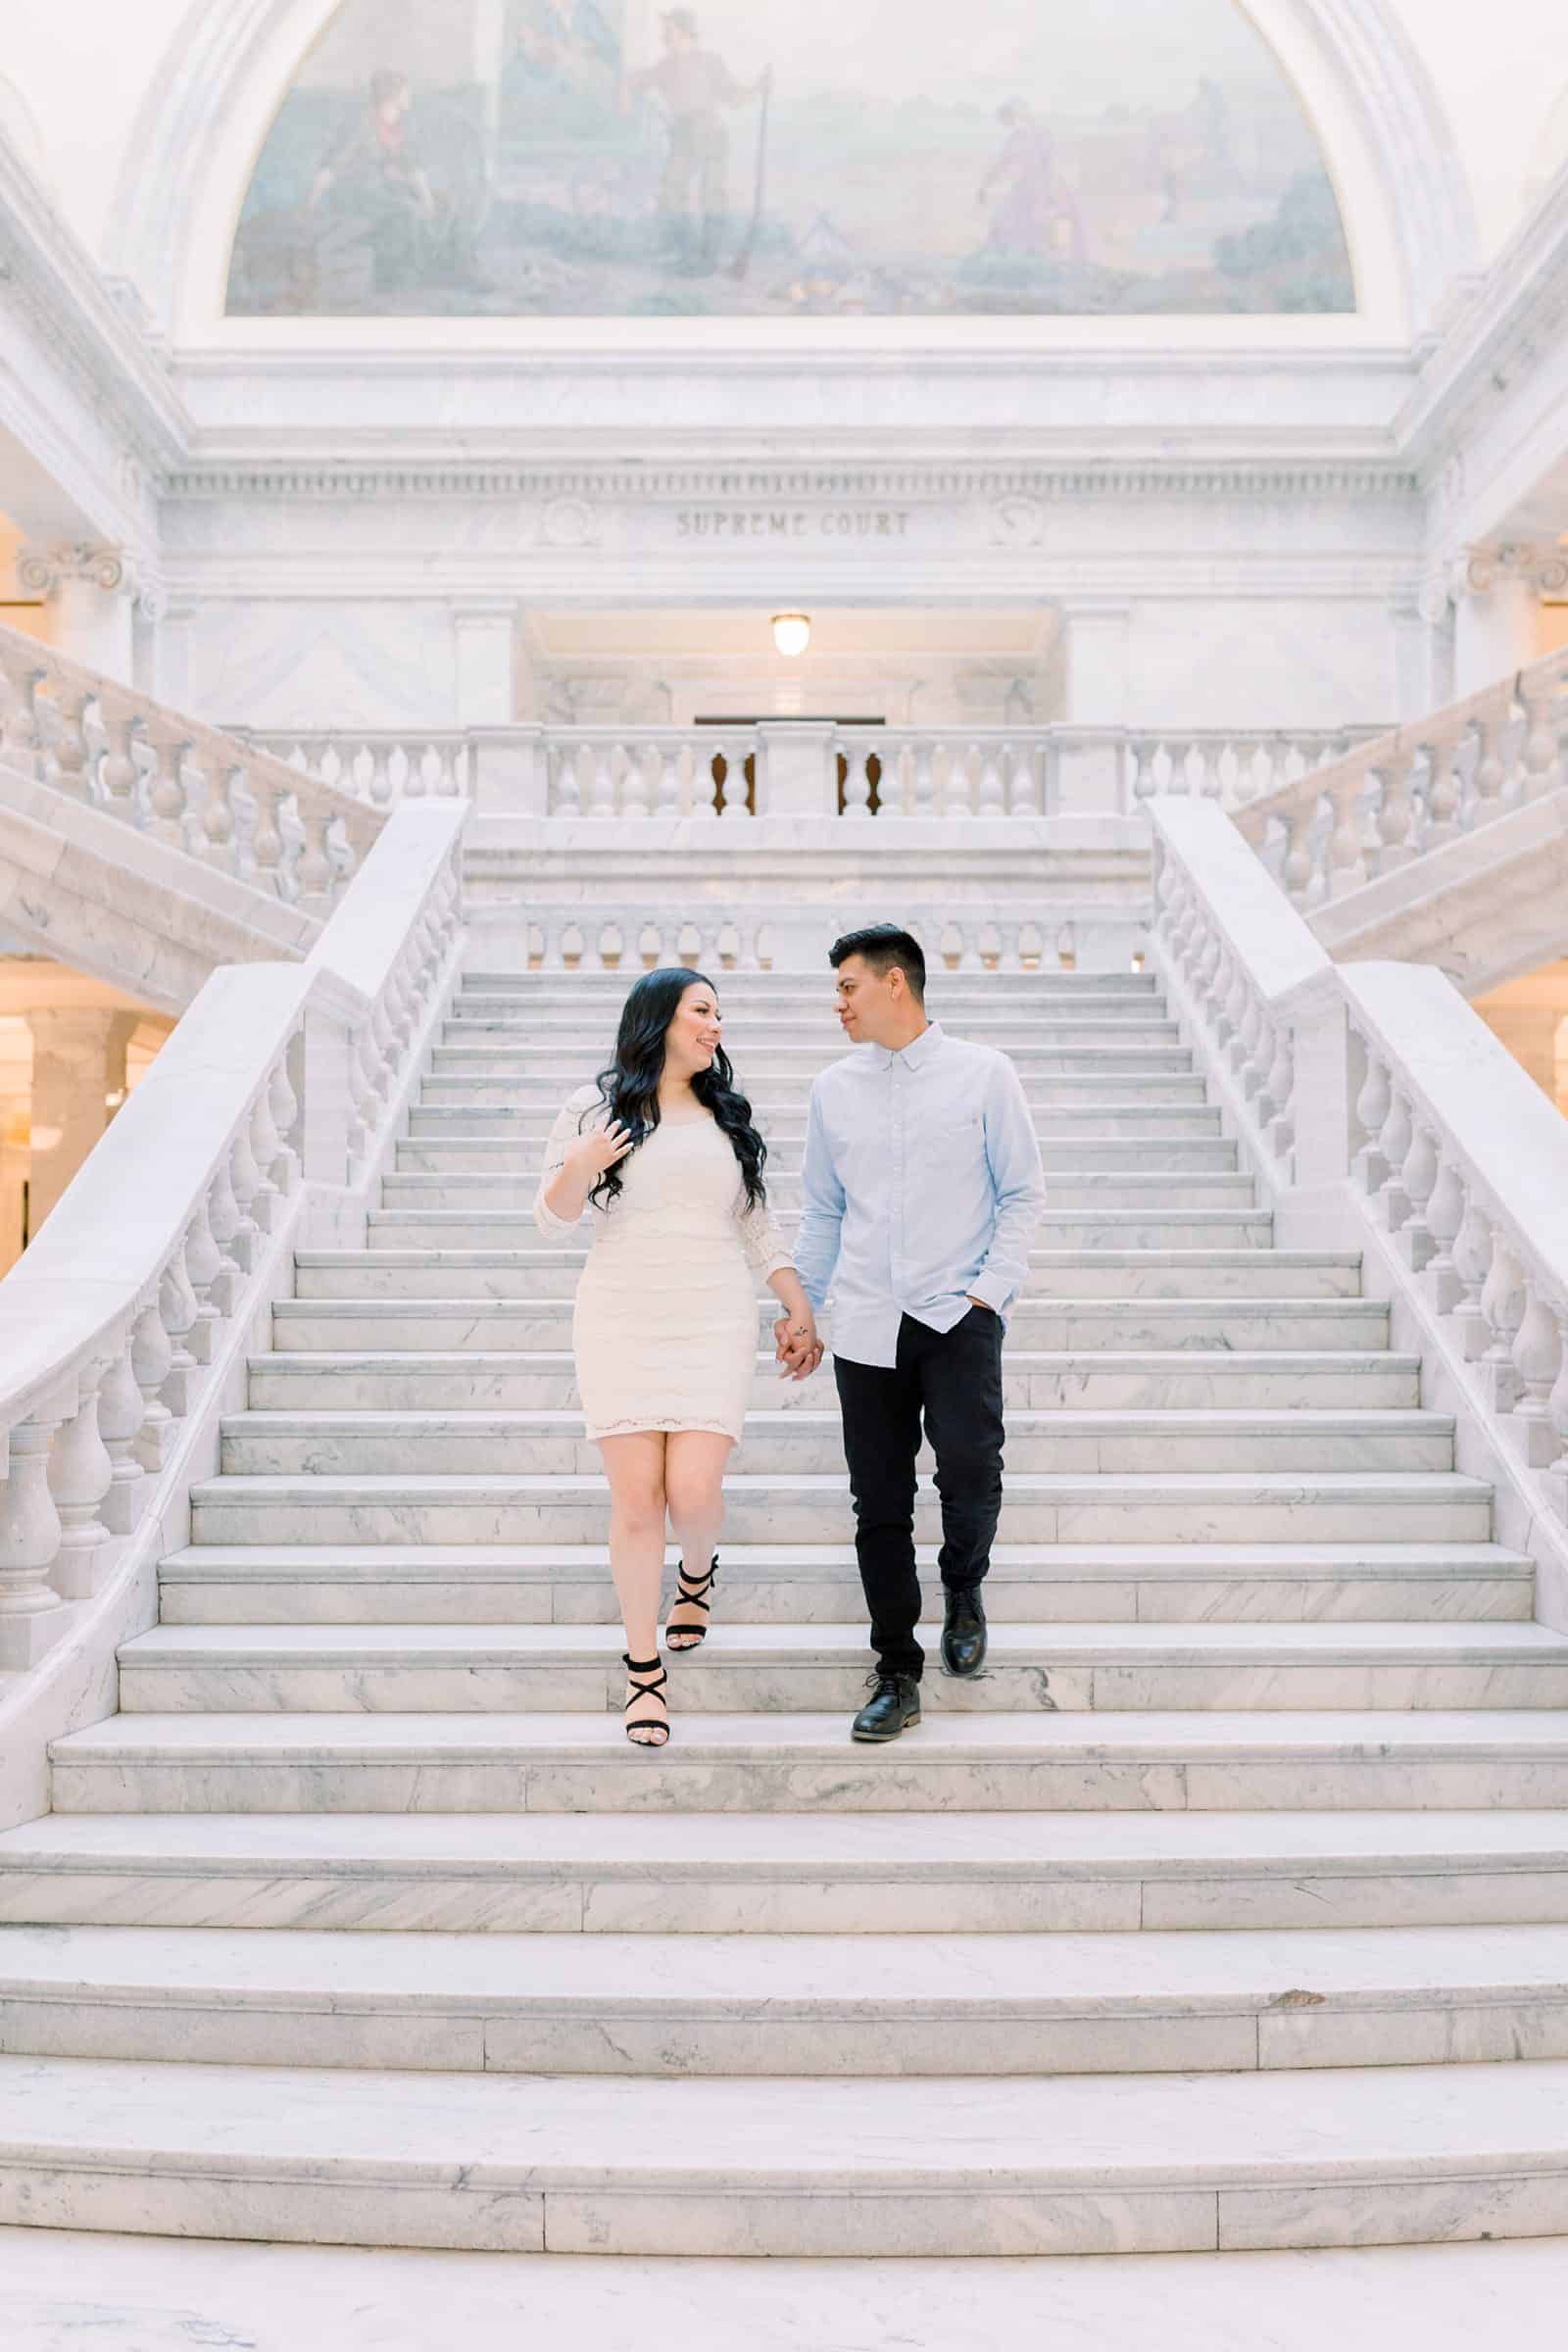 Classy engagement photos at the Utah State Capitol Building in downtown Salt Lake City, outfit for engagement pictures, short white lace dress and light blue button up shirt, big white staircase